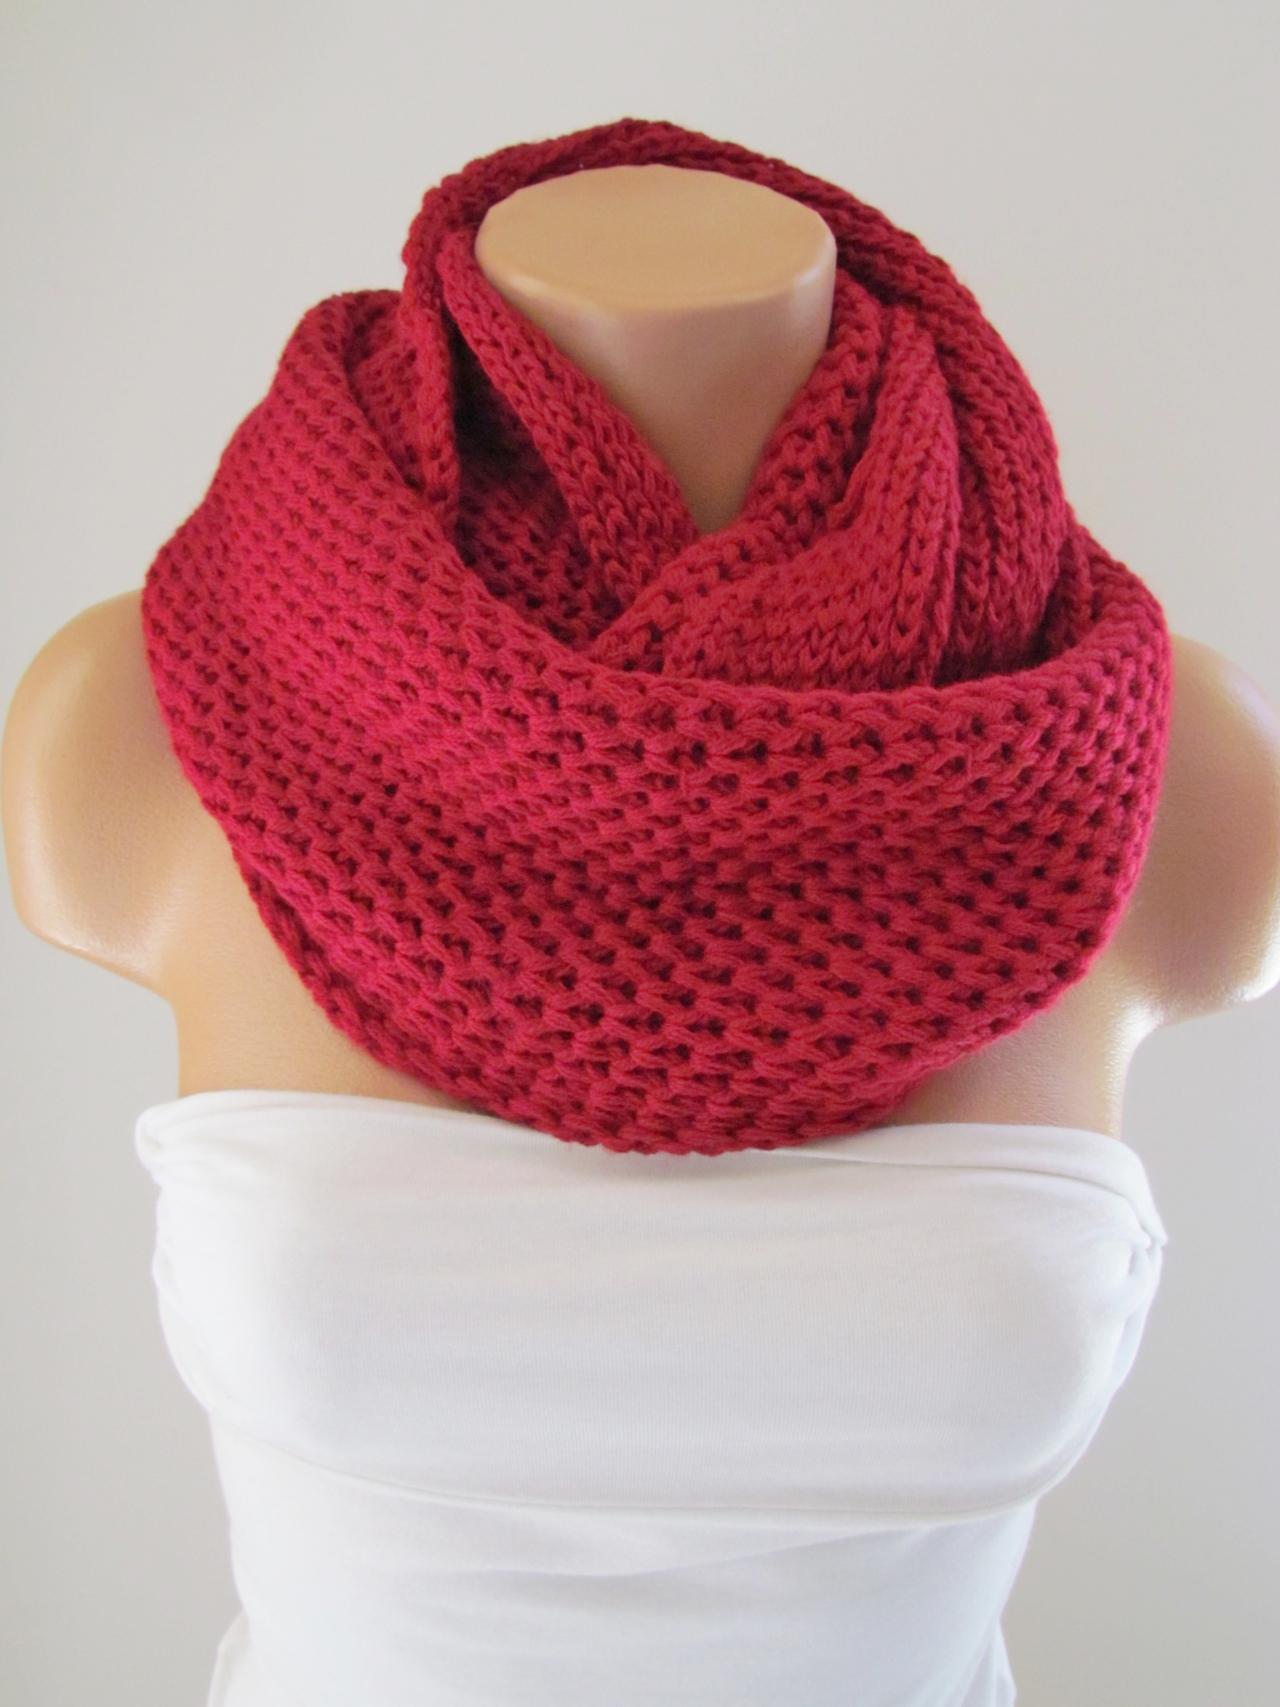 Red Infinity Loop Scarf,Neck Warmer,Handmade Circle Scarf,Cowl Scarf, Winter Accessories, Fall Fashion,Chunky Scarf.